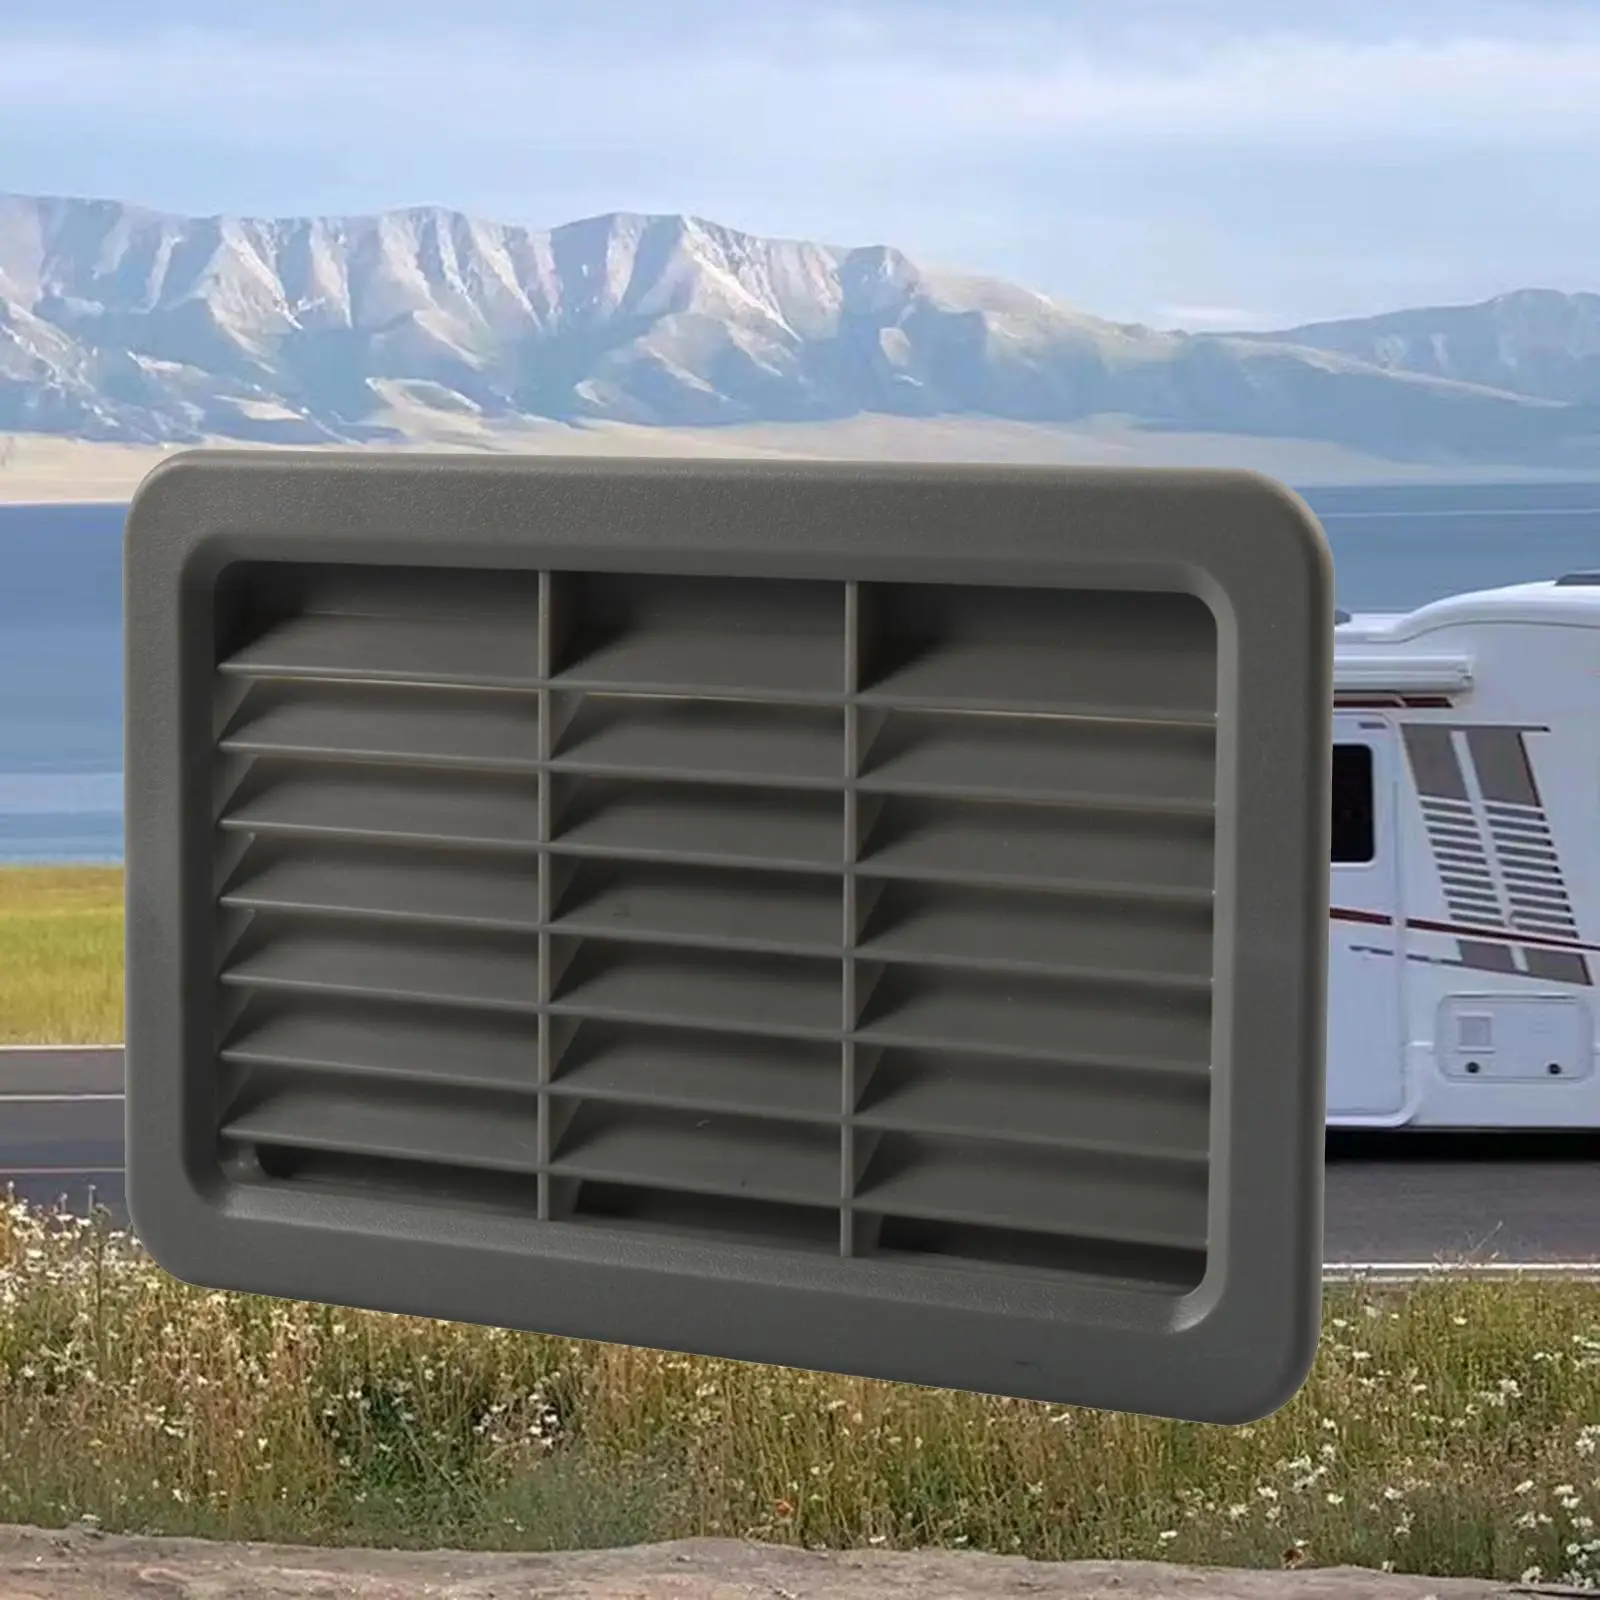 Air Vent Grille Easy to Install Replace for Camping Camper Trailer